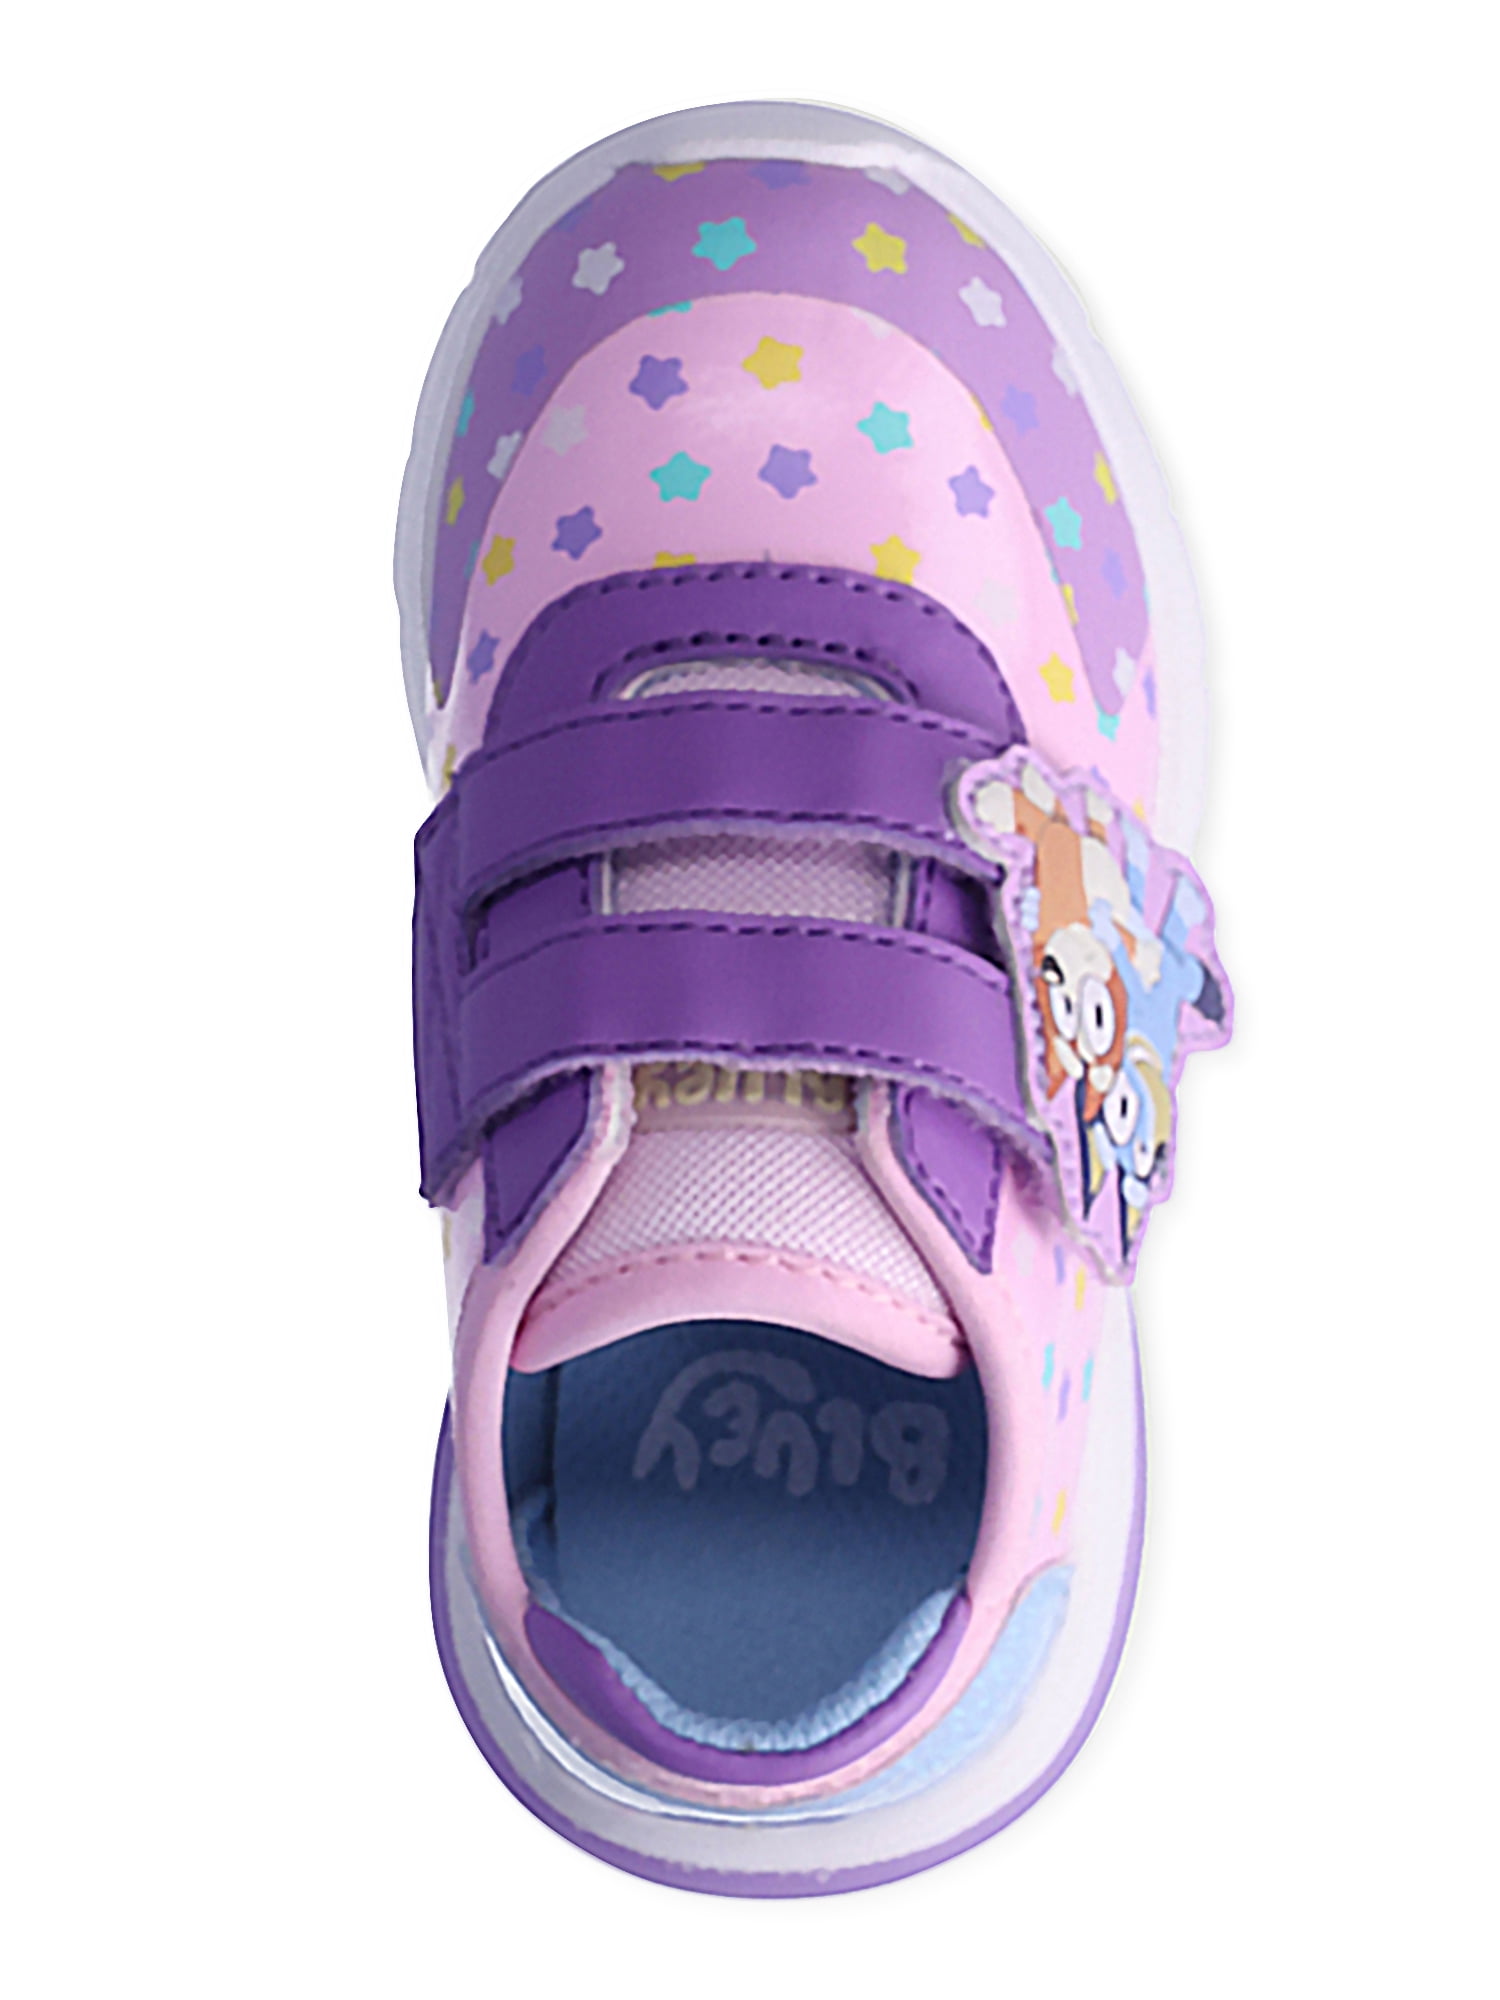 Bluey Little & Big Girl High Top Sneakers, Sizes 7-1